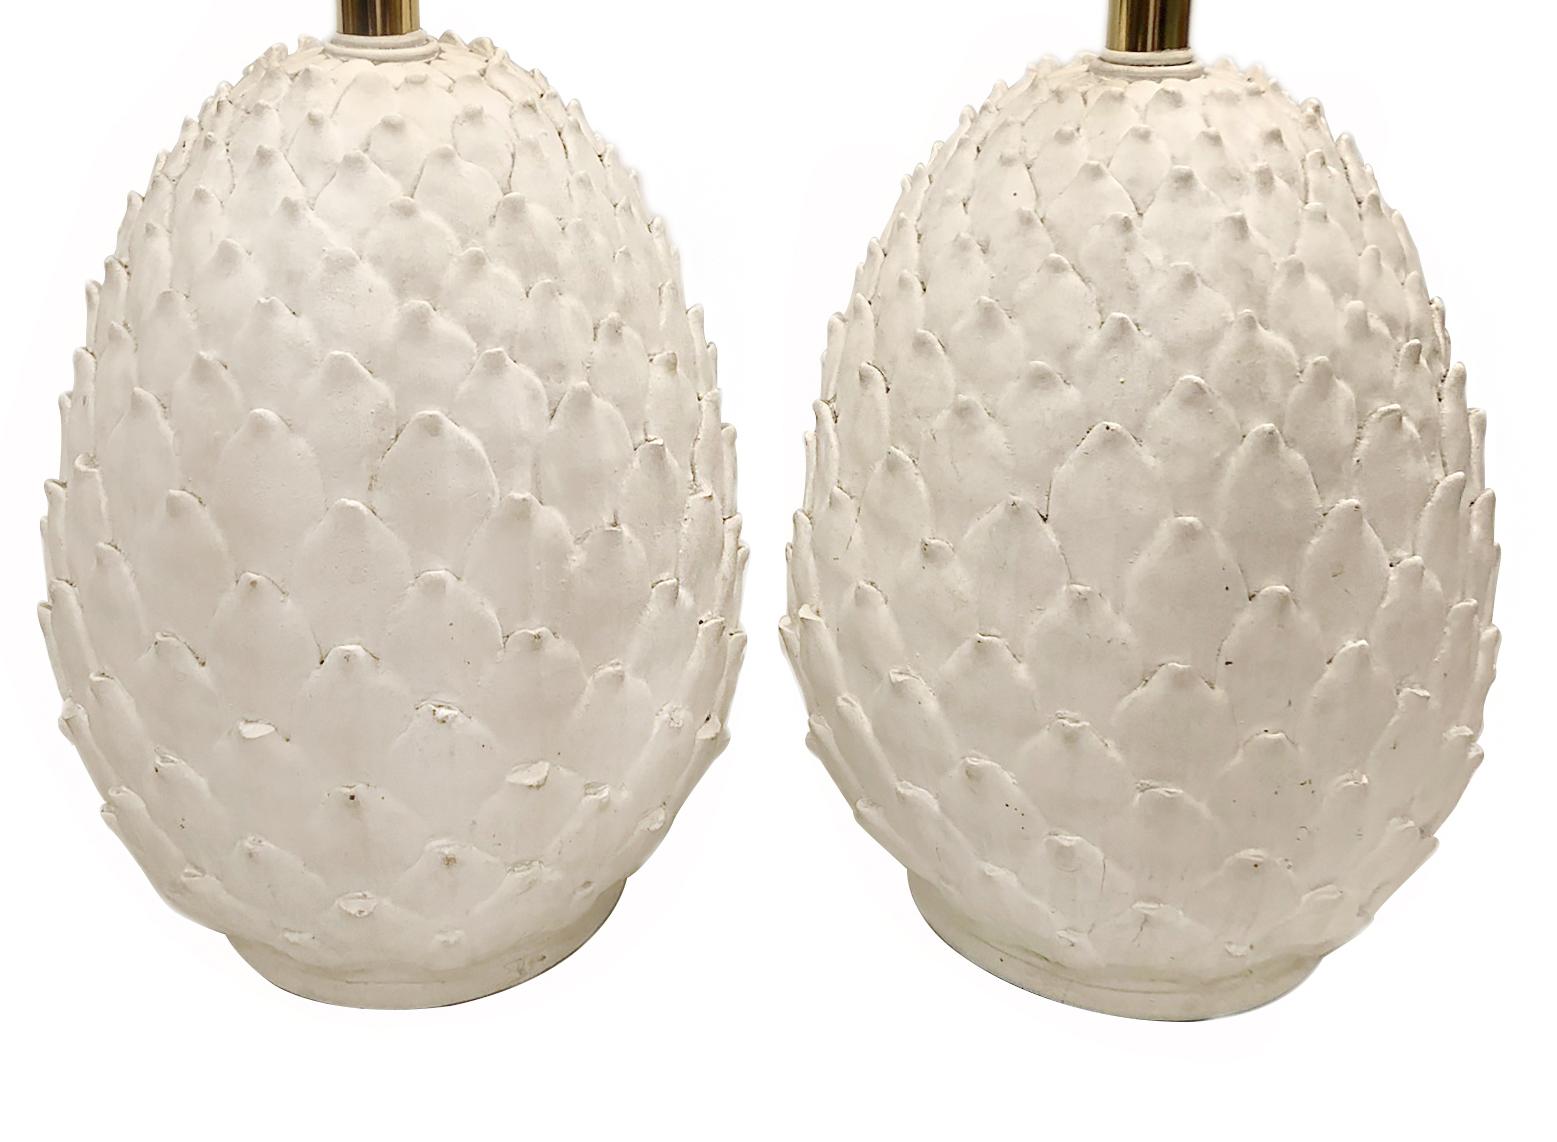 Pair of circa 1930s Italian pineapple-shaped white matte-glazed porcelain table lamps.

Measurements:
Height of body 12